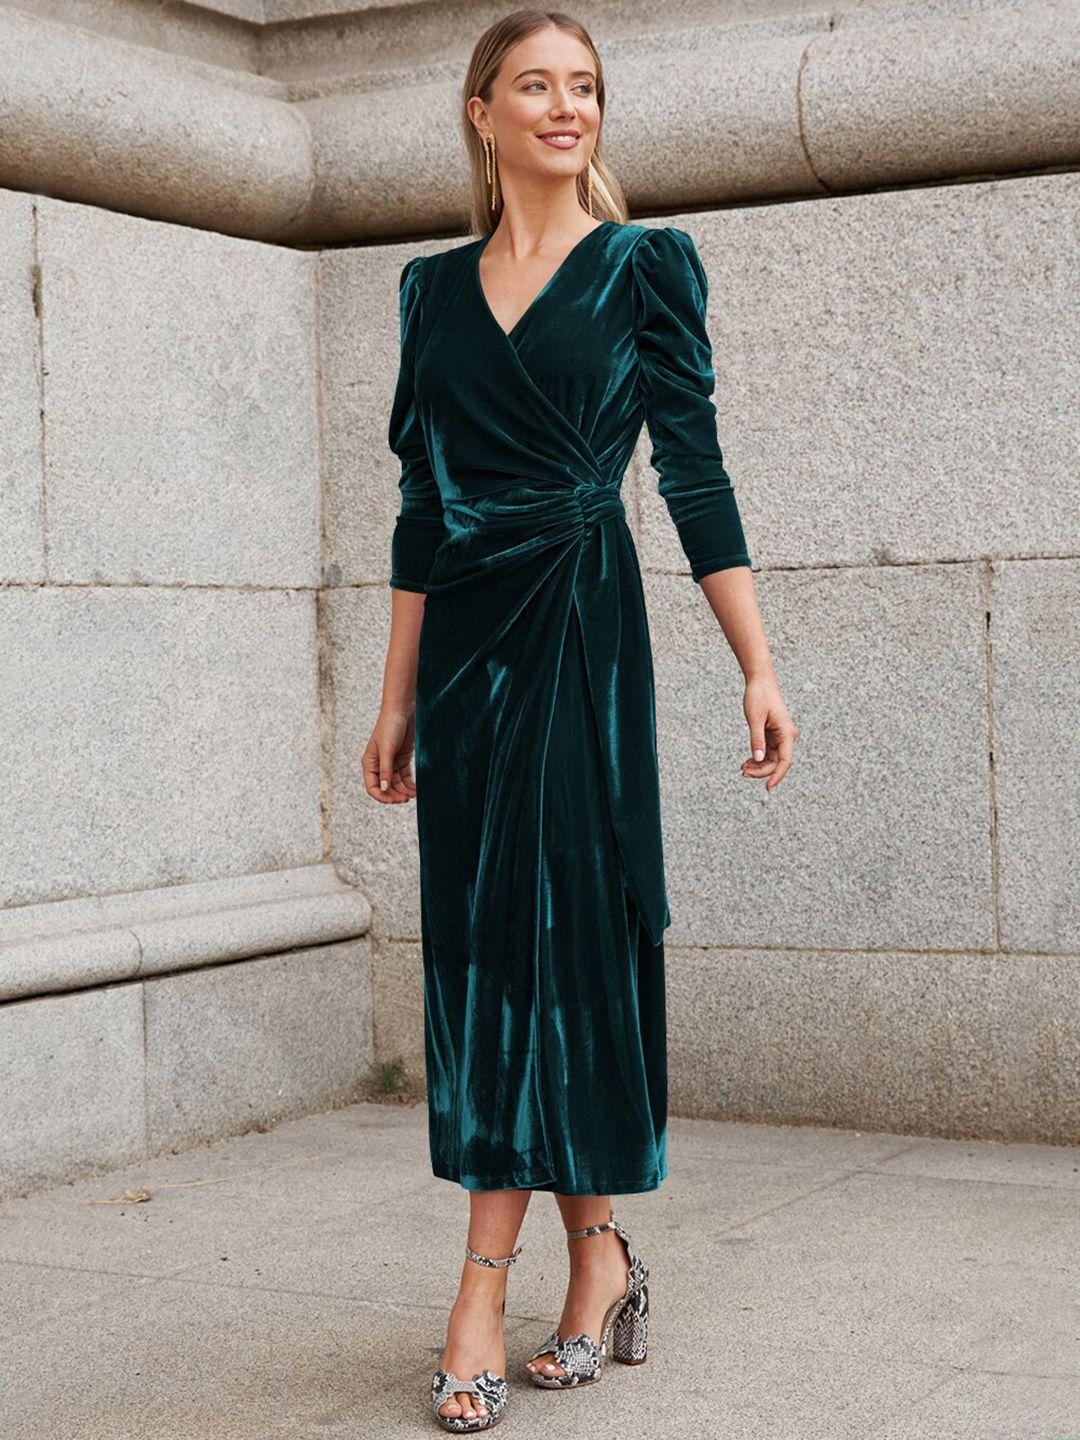 stylecast green v-neck puff sleeves a-line maxi dress